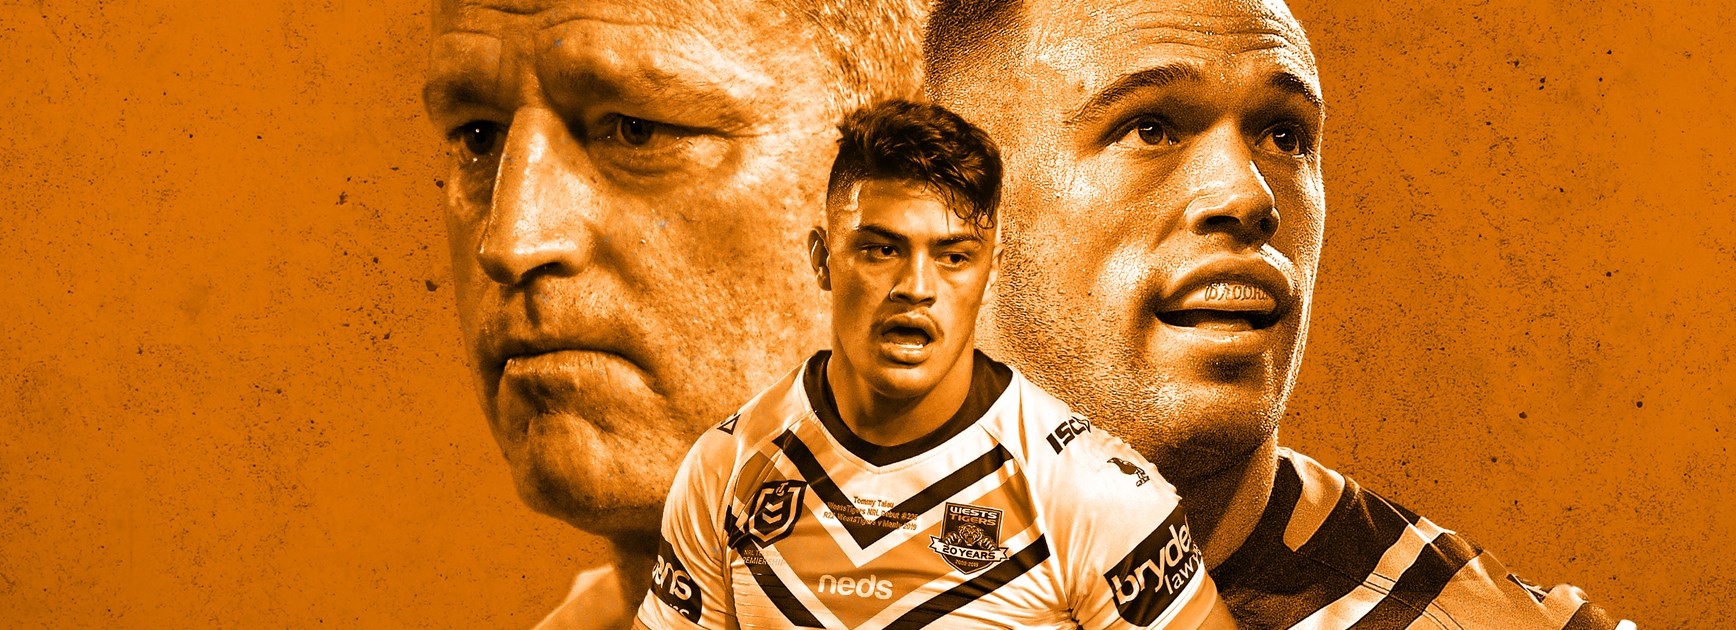 Wests Tigers 2020 season preview